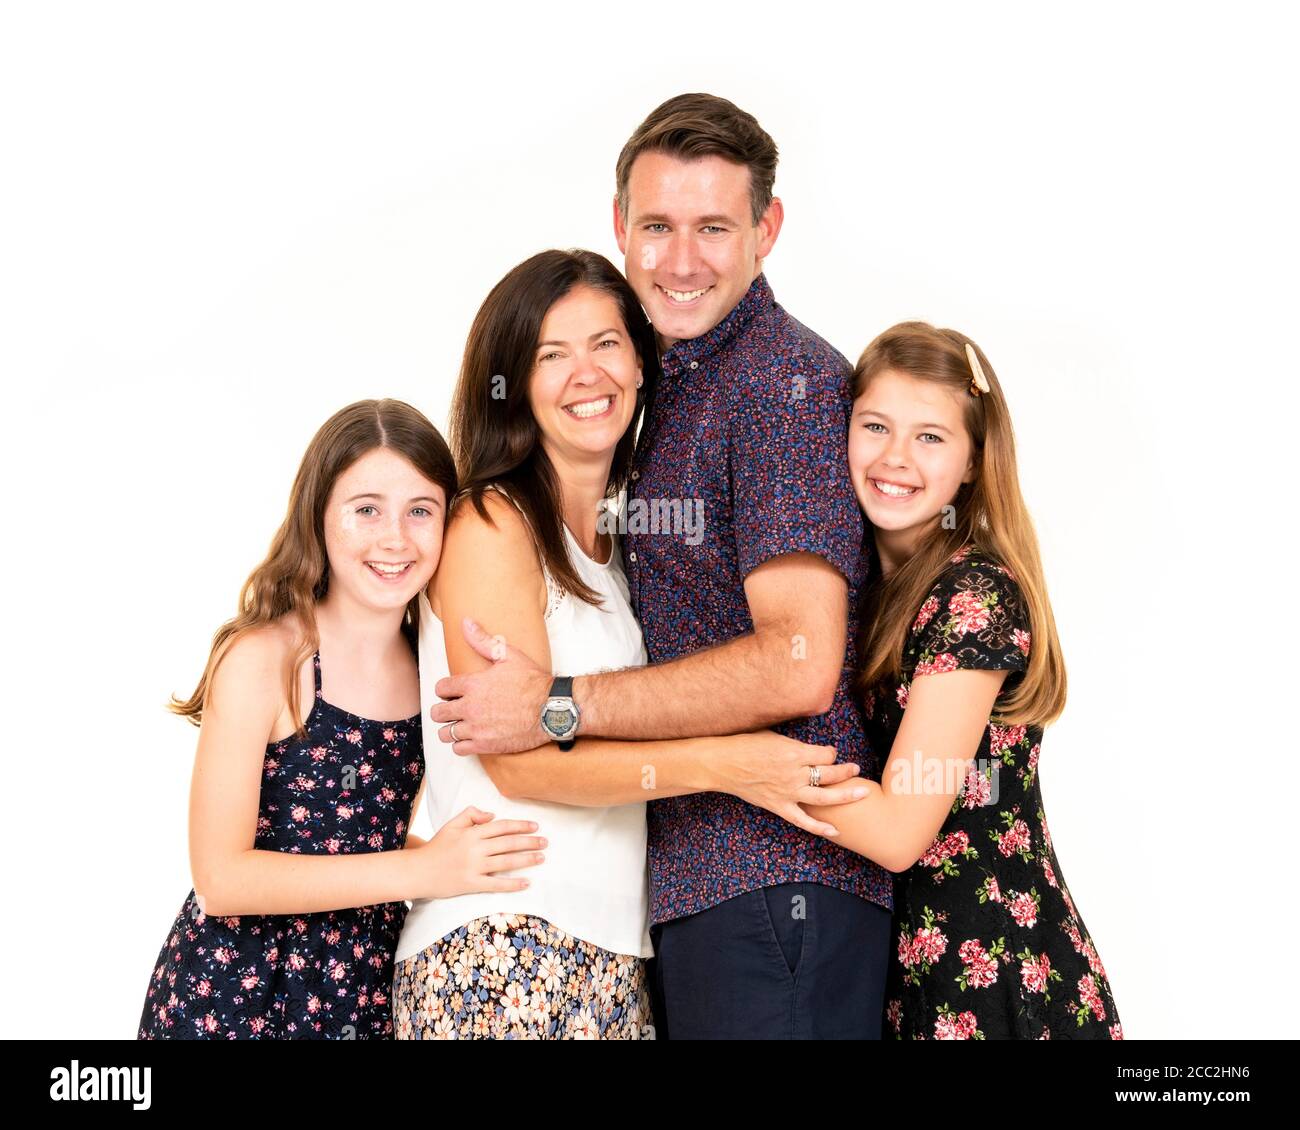 Horizontal portrait of a young family against a white background in a studio or high key. Stock Photo